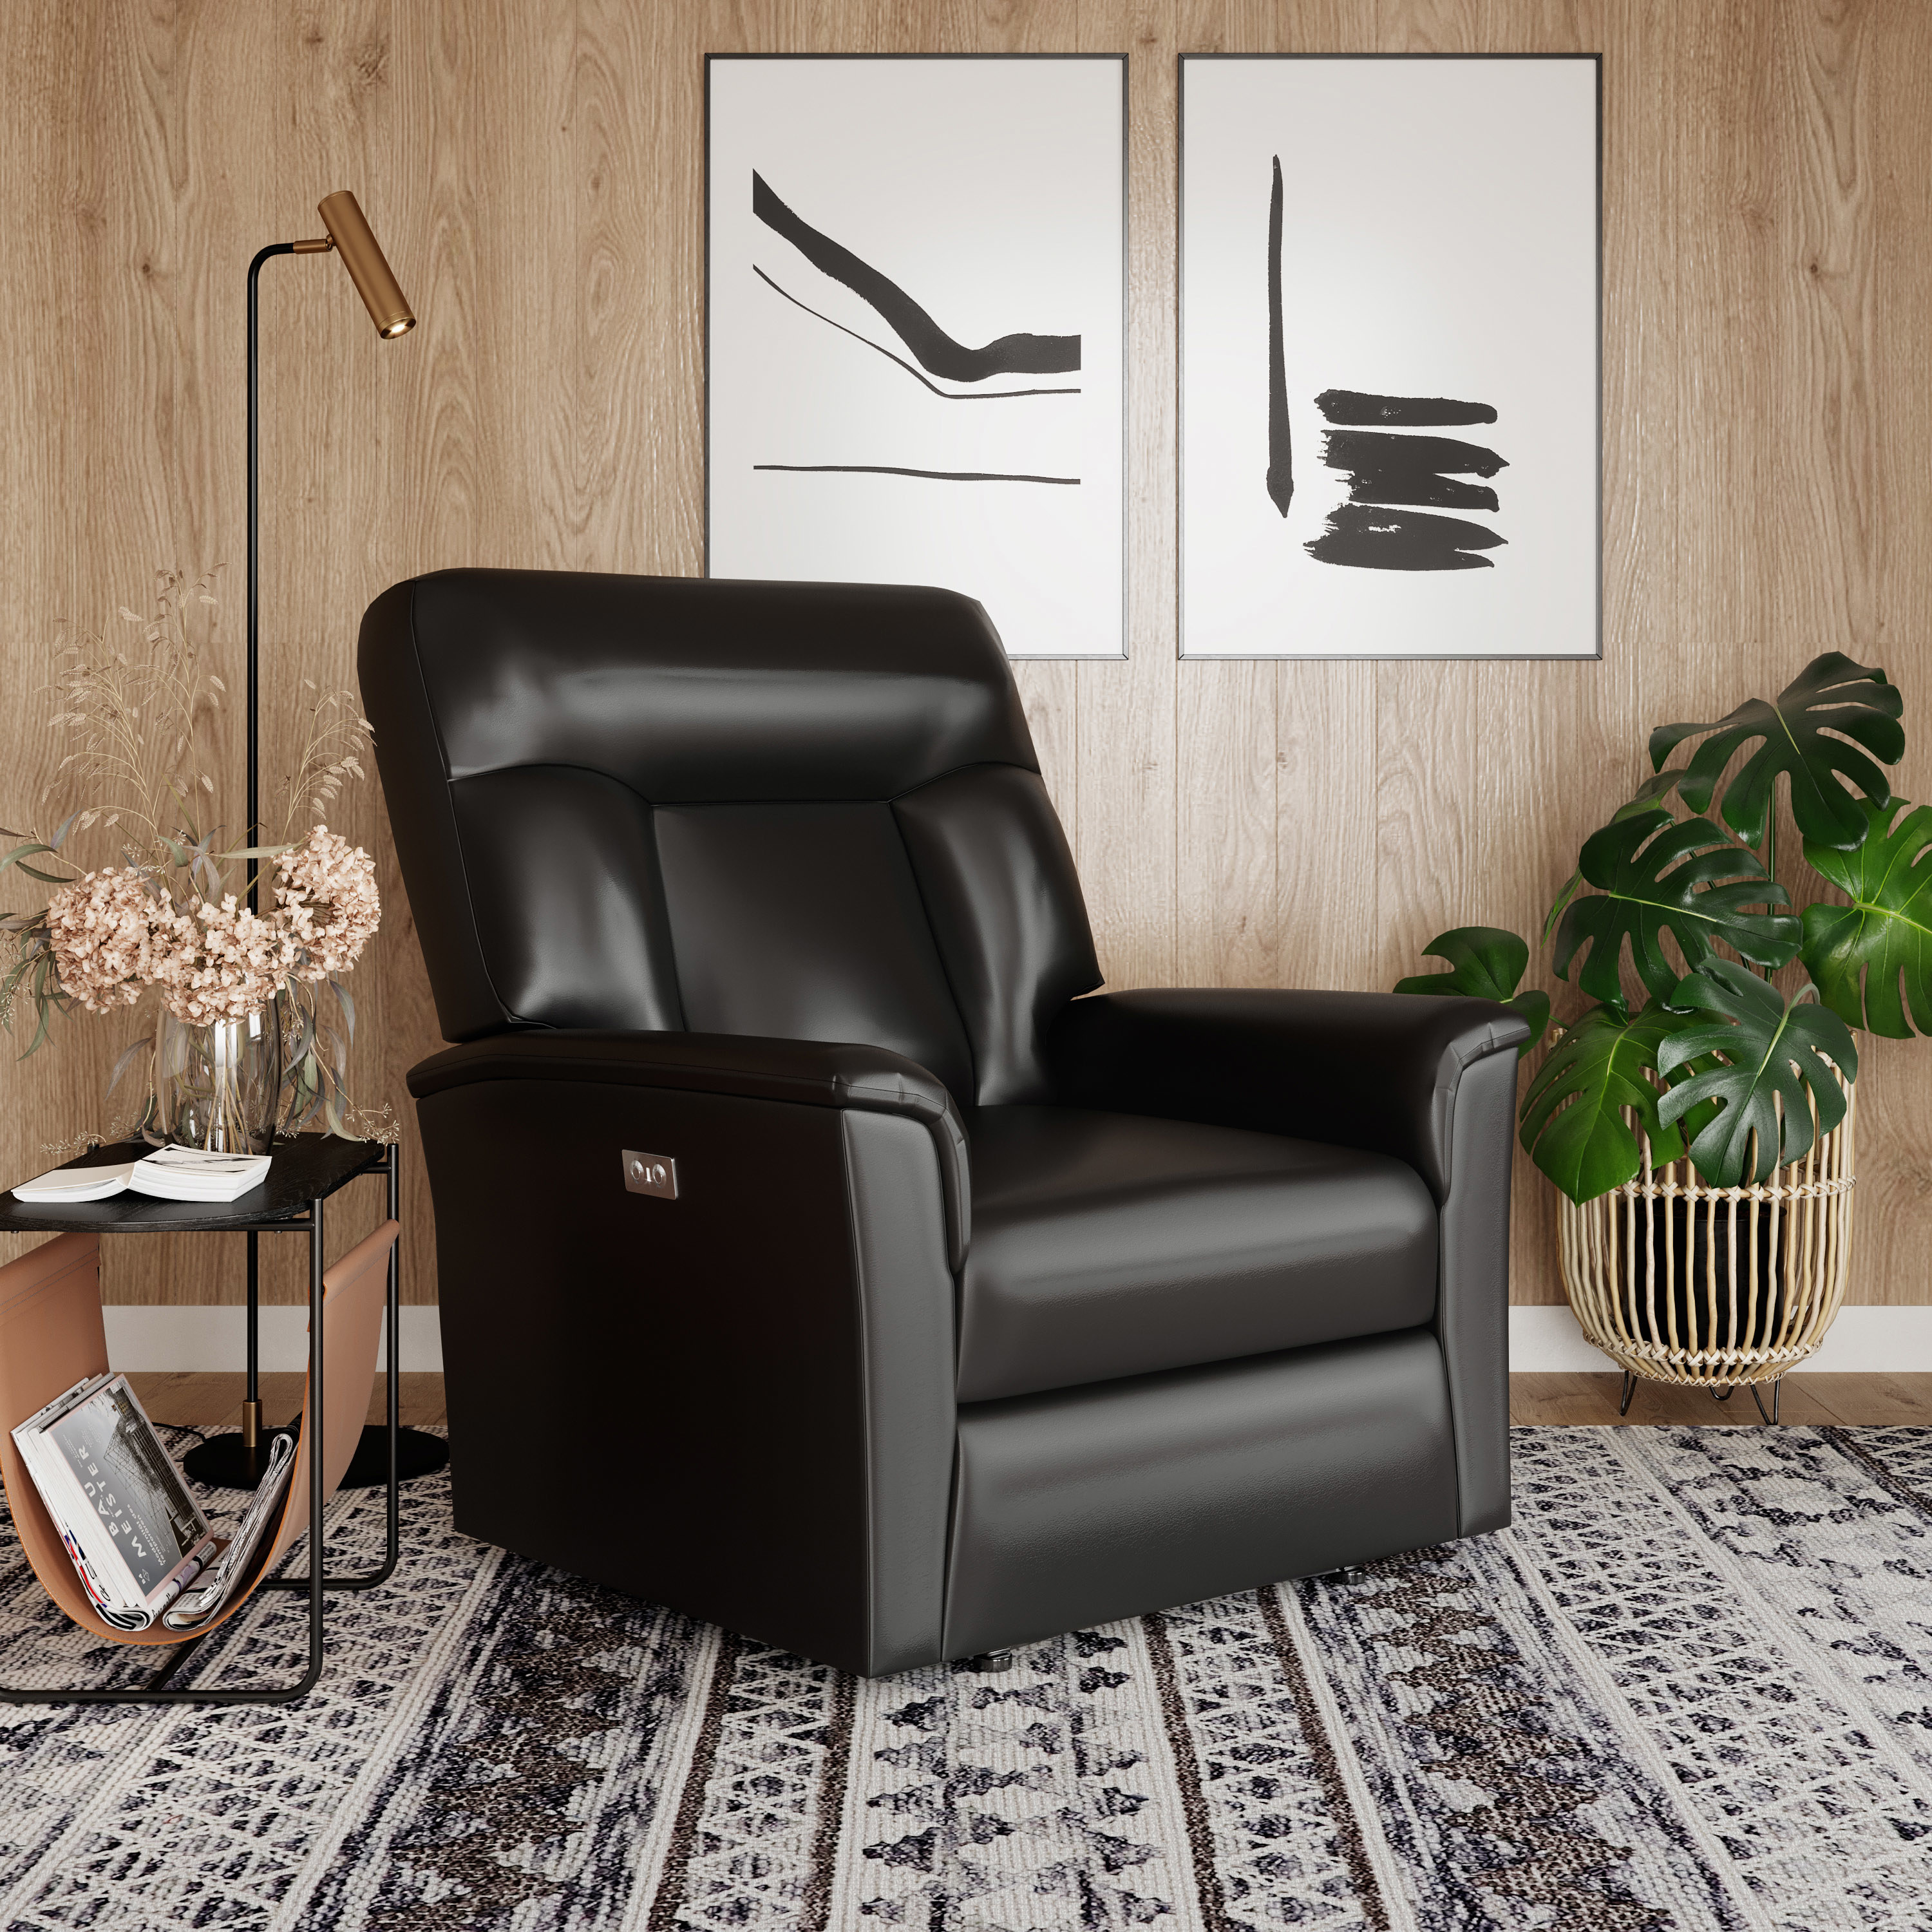 black faux leather recliner chair in a living room